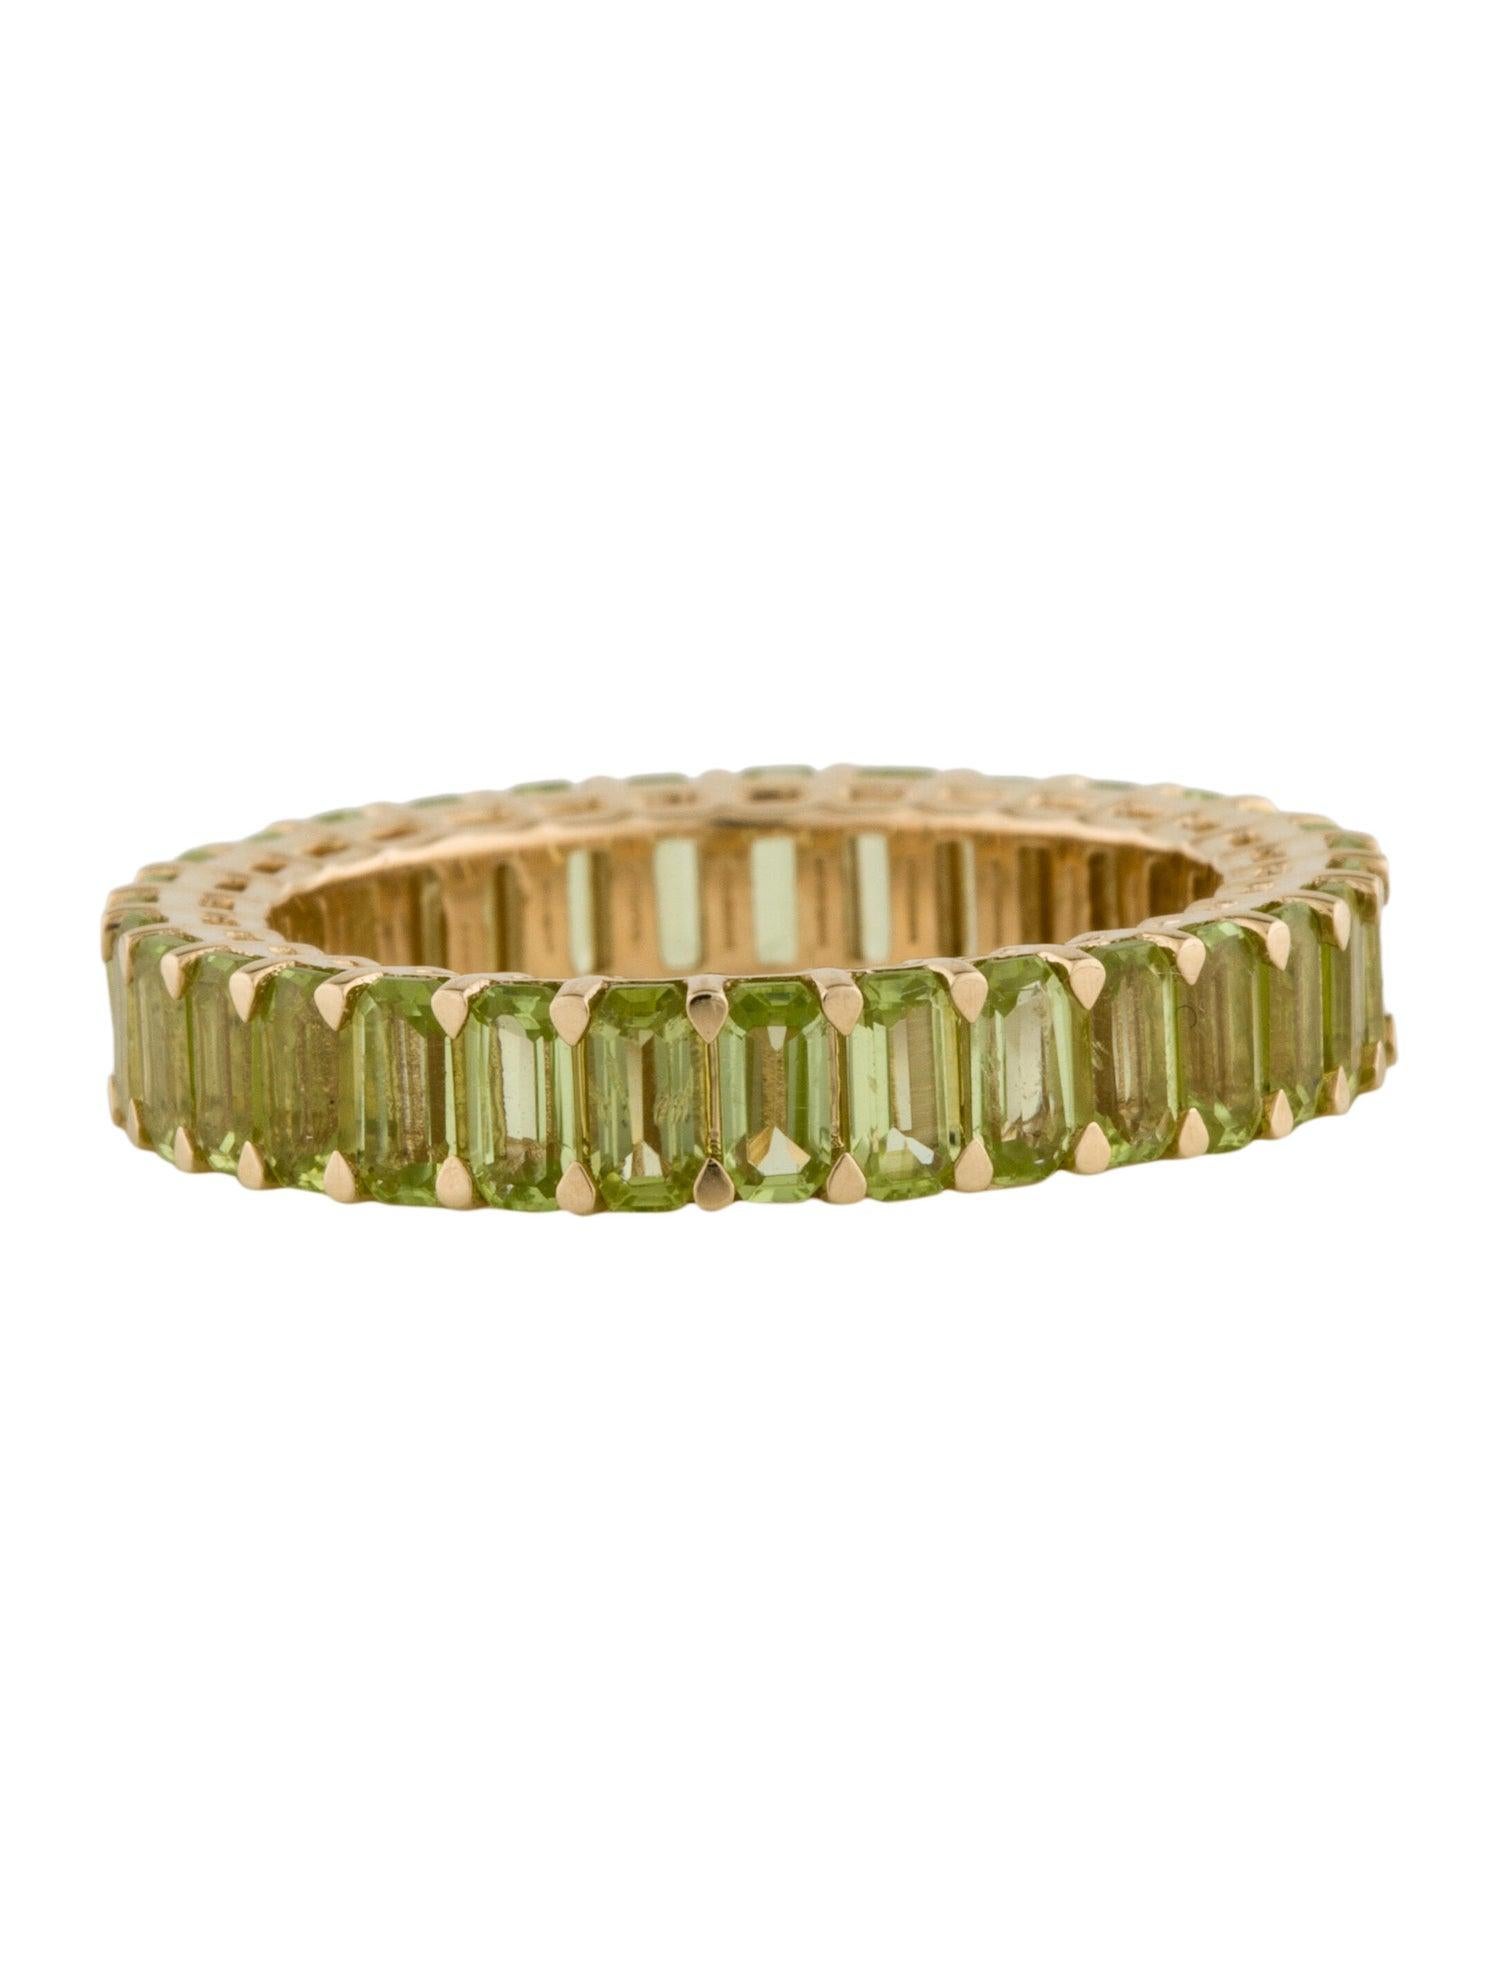 Luxury 14K Peridot Eternity Band Ring 4.21ctw - Size 6.75 - Statement Jewelry In New Condition In Holtsville, NY